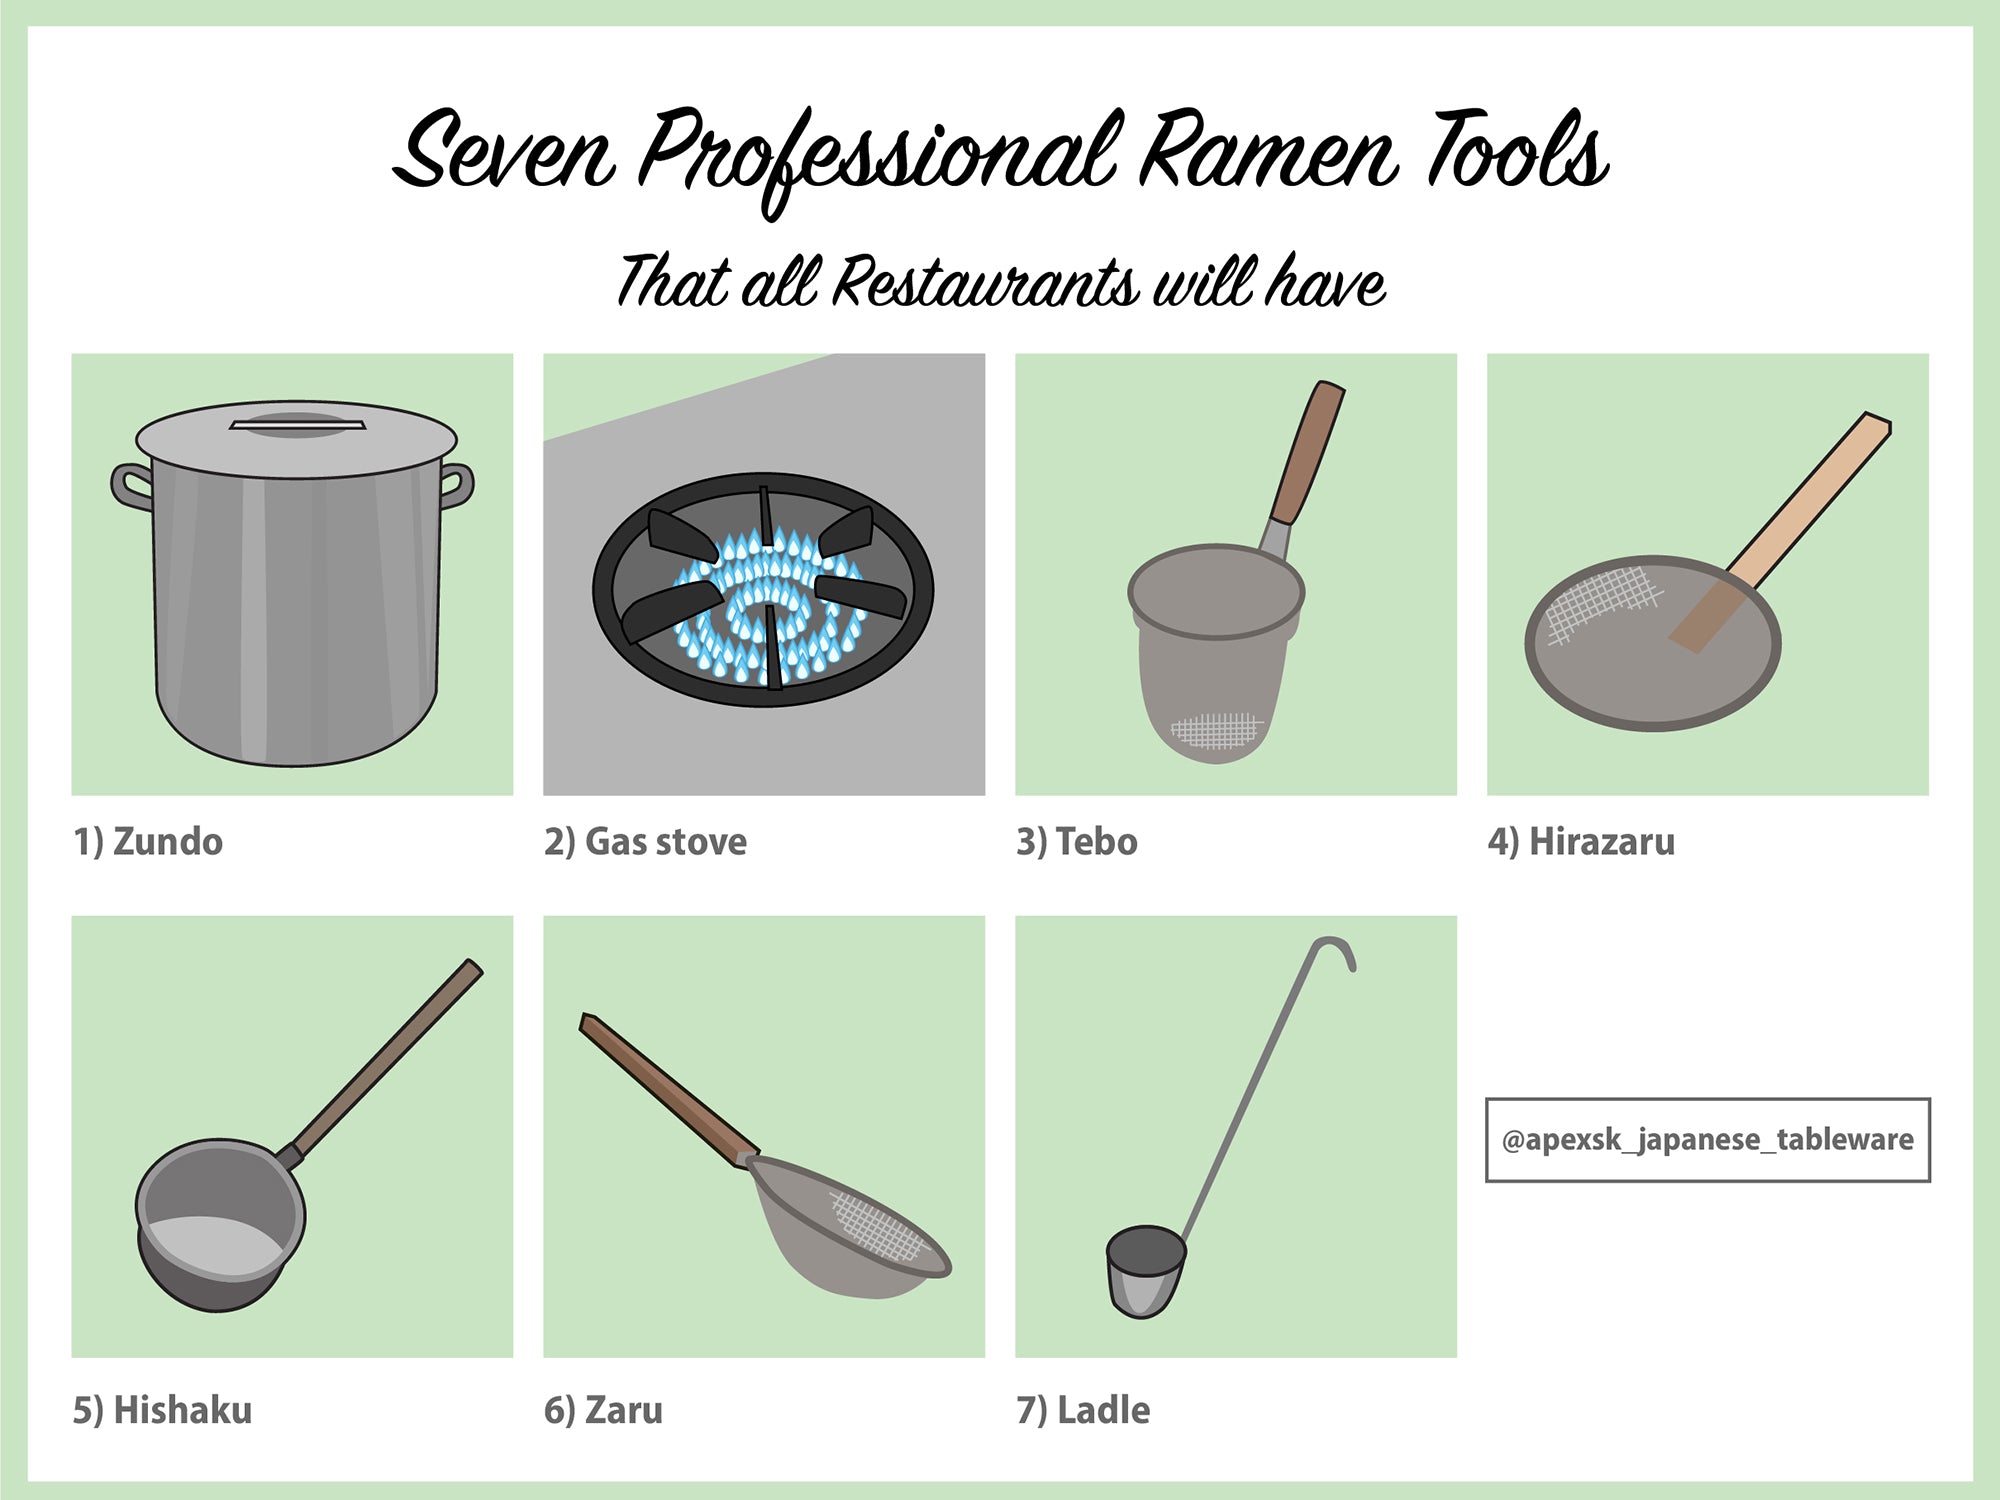 7 Professional Ramen Tools You've Probably Never Heard Of